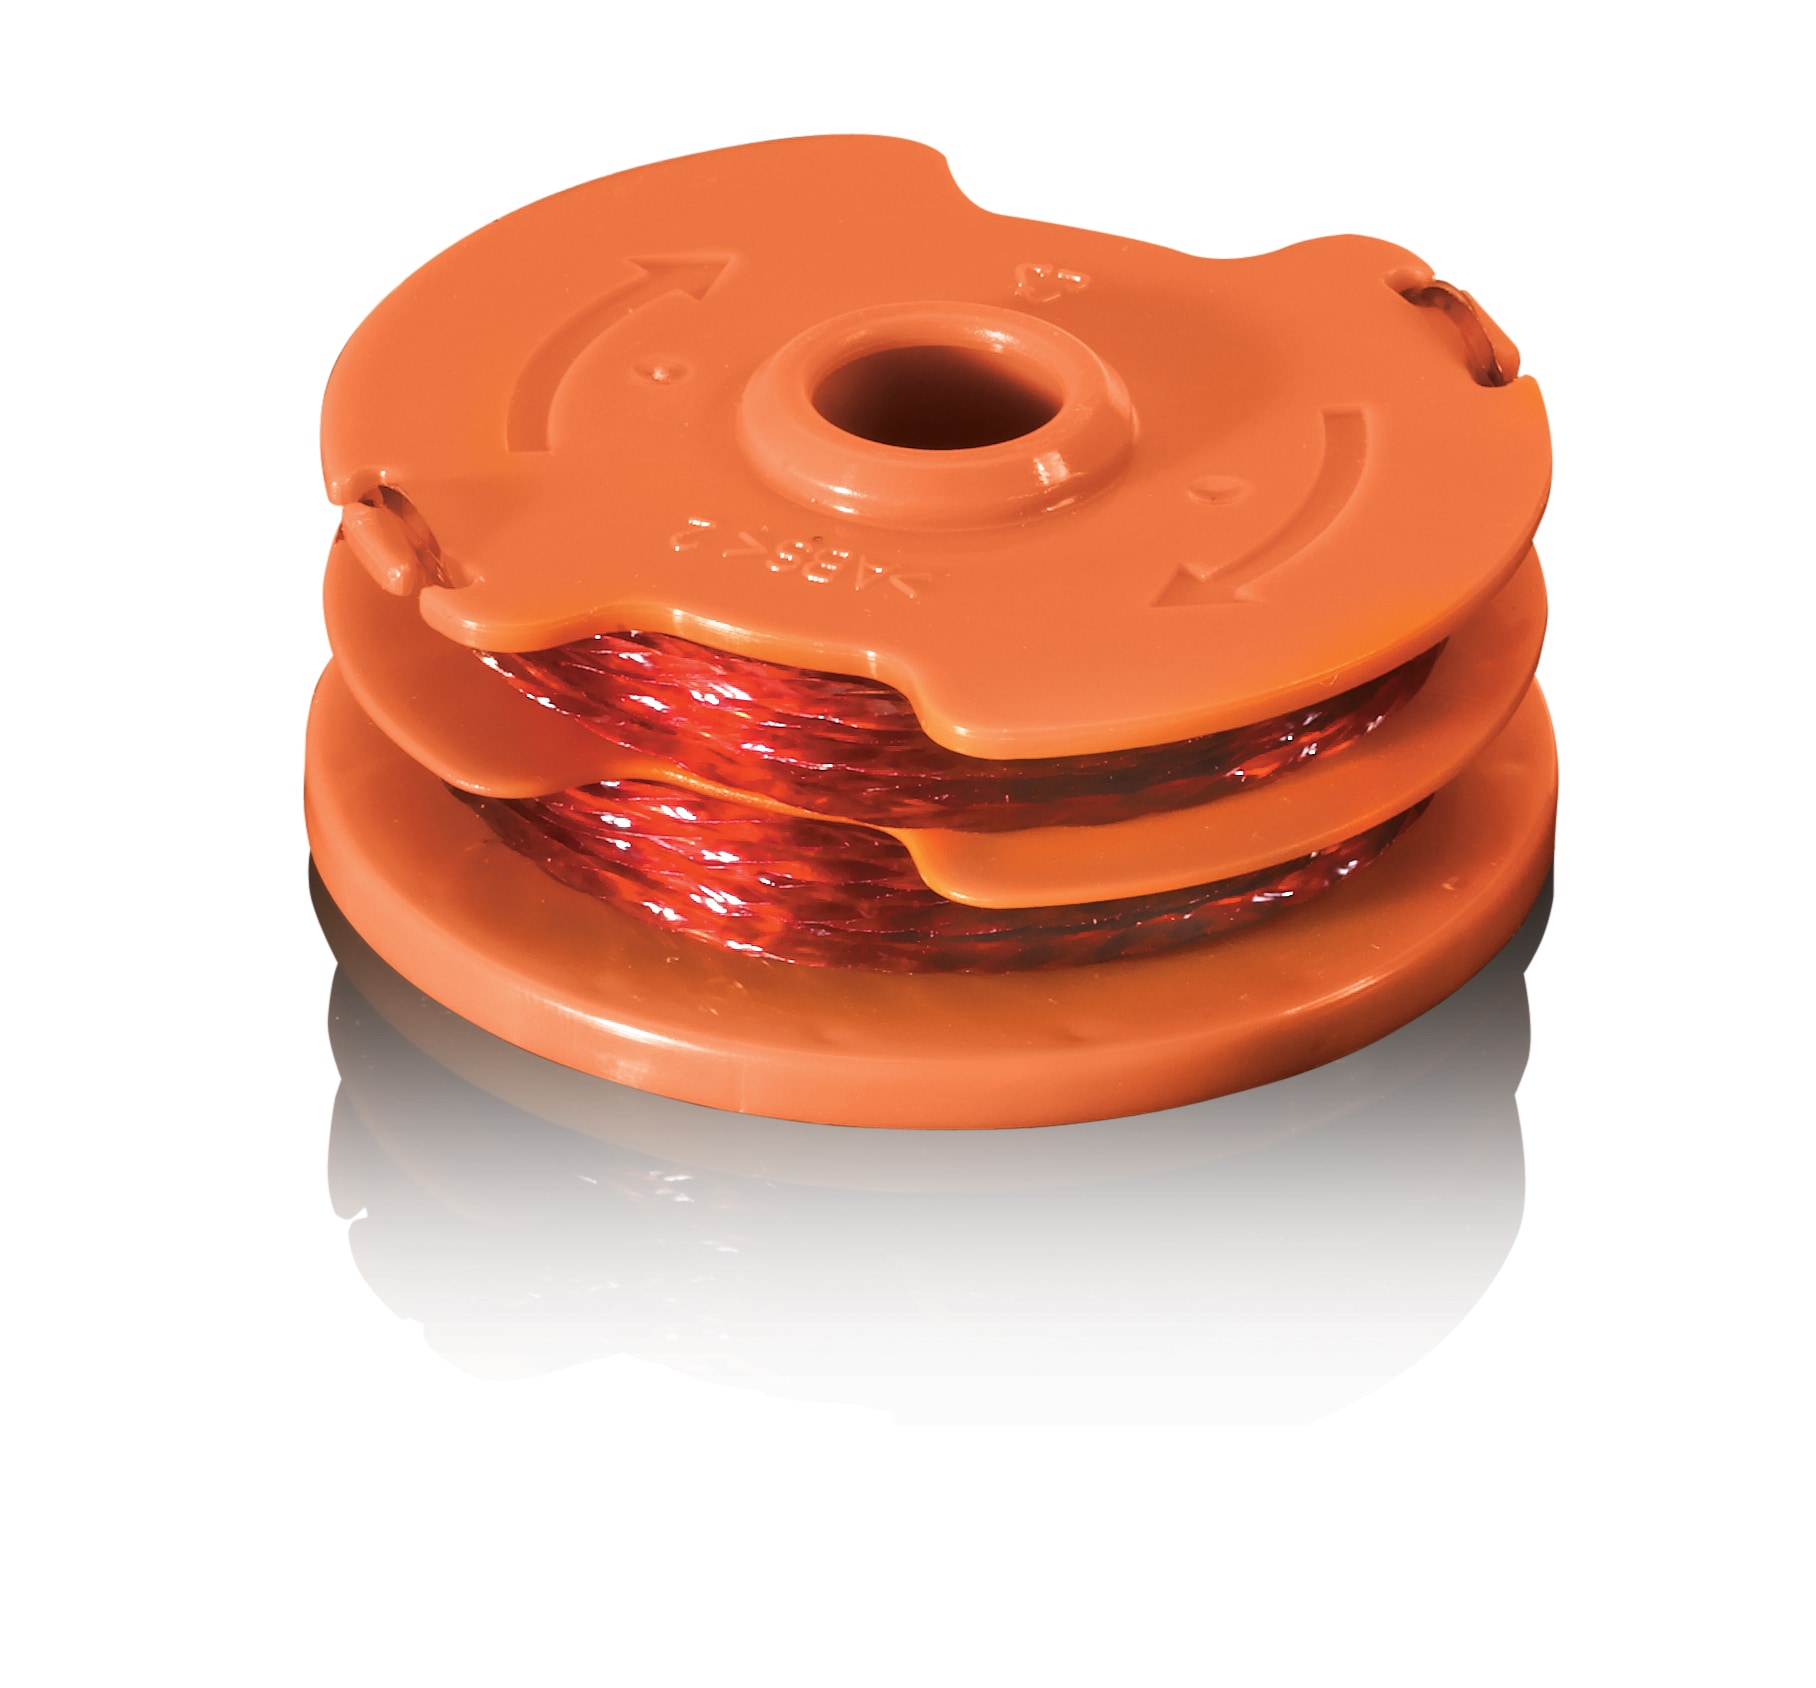 Line Trimmer Spool, Spool , Spring Trimmer Spool Autofeed System